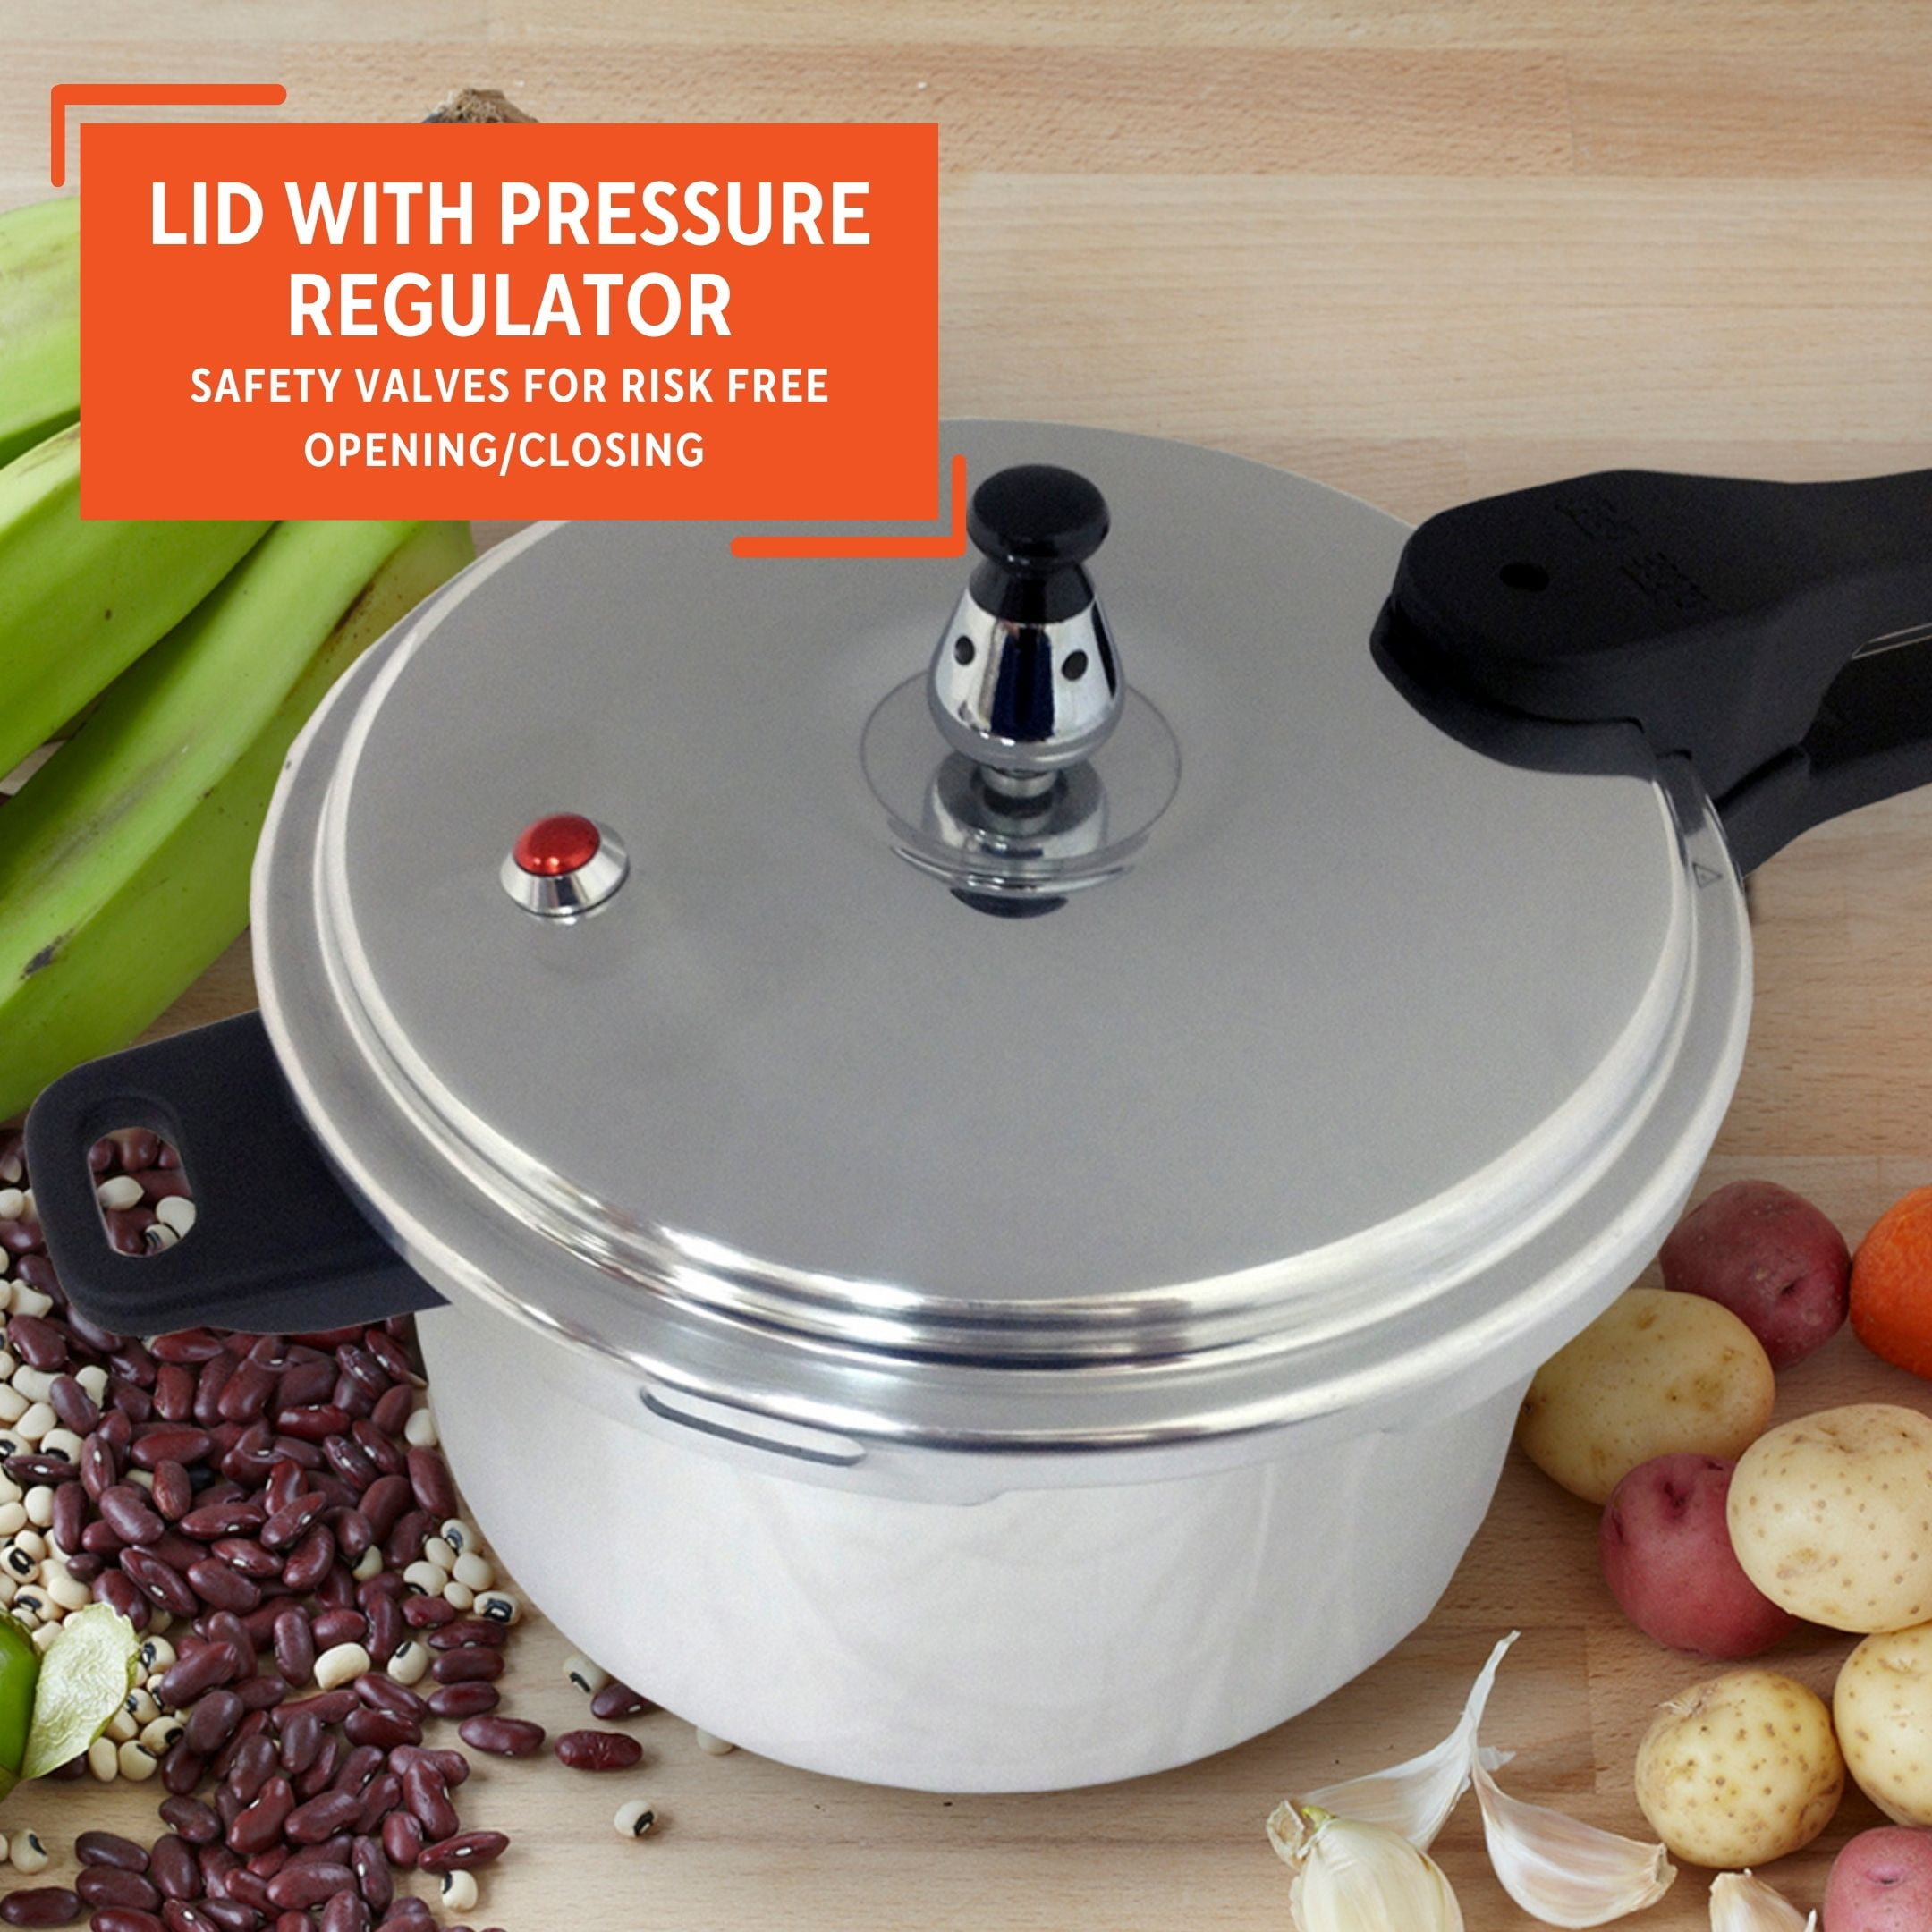 IMUSA USA - It's Monday! We know Mondays can be hard. Save time cooking  using your IMUSA pressure cooker for today's dinner. Pressure cookers can  reduce cooking time by up to 70%